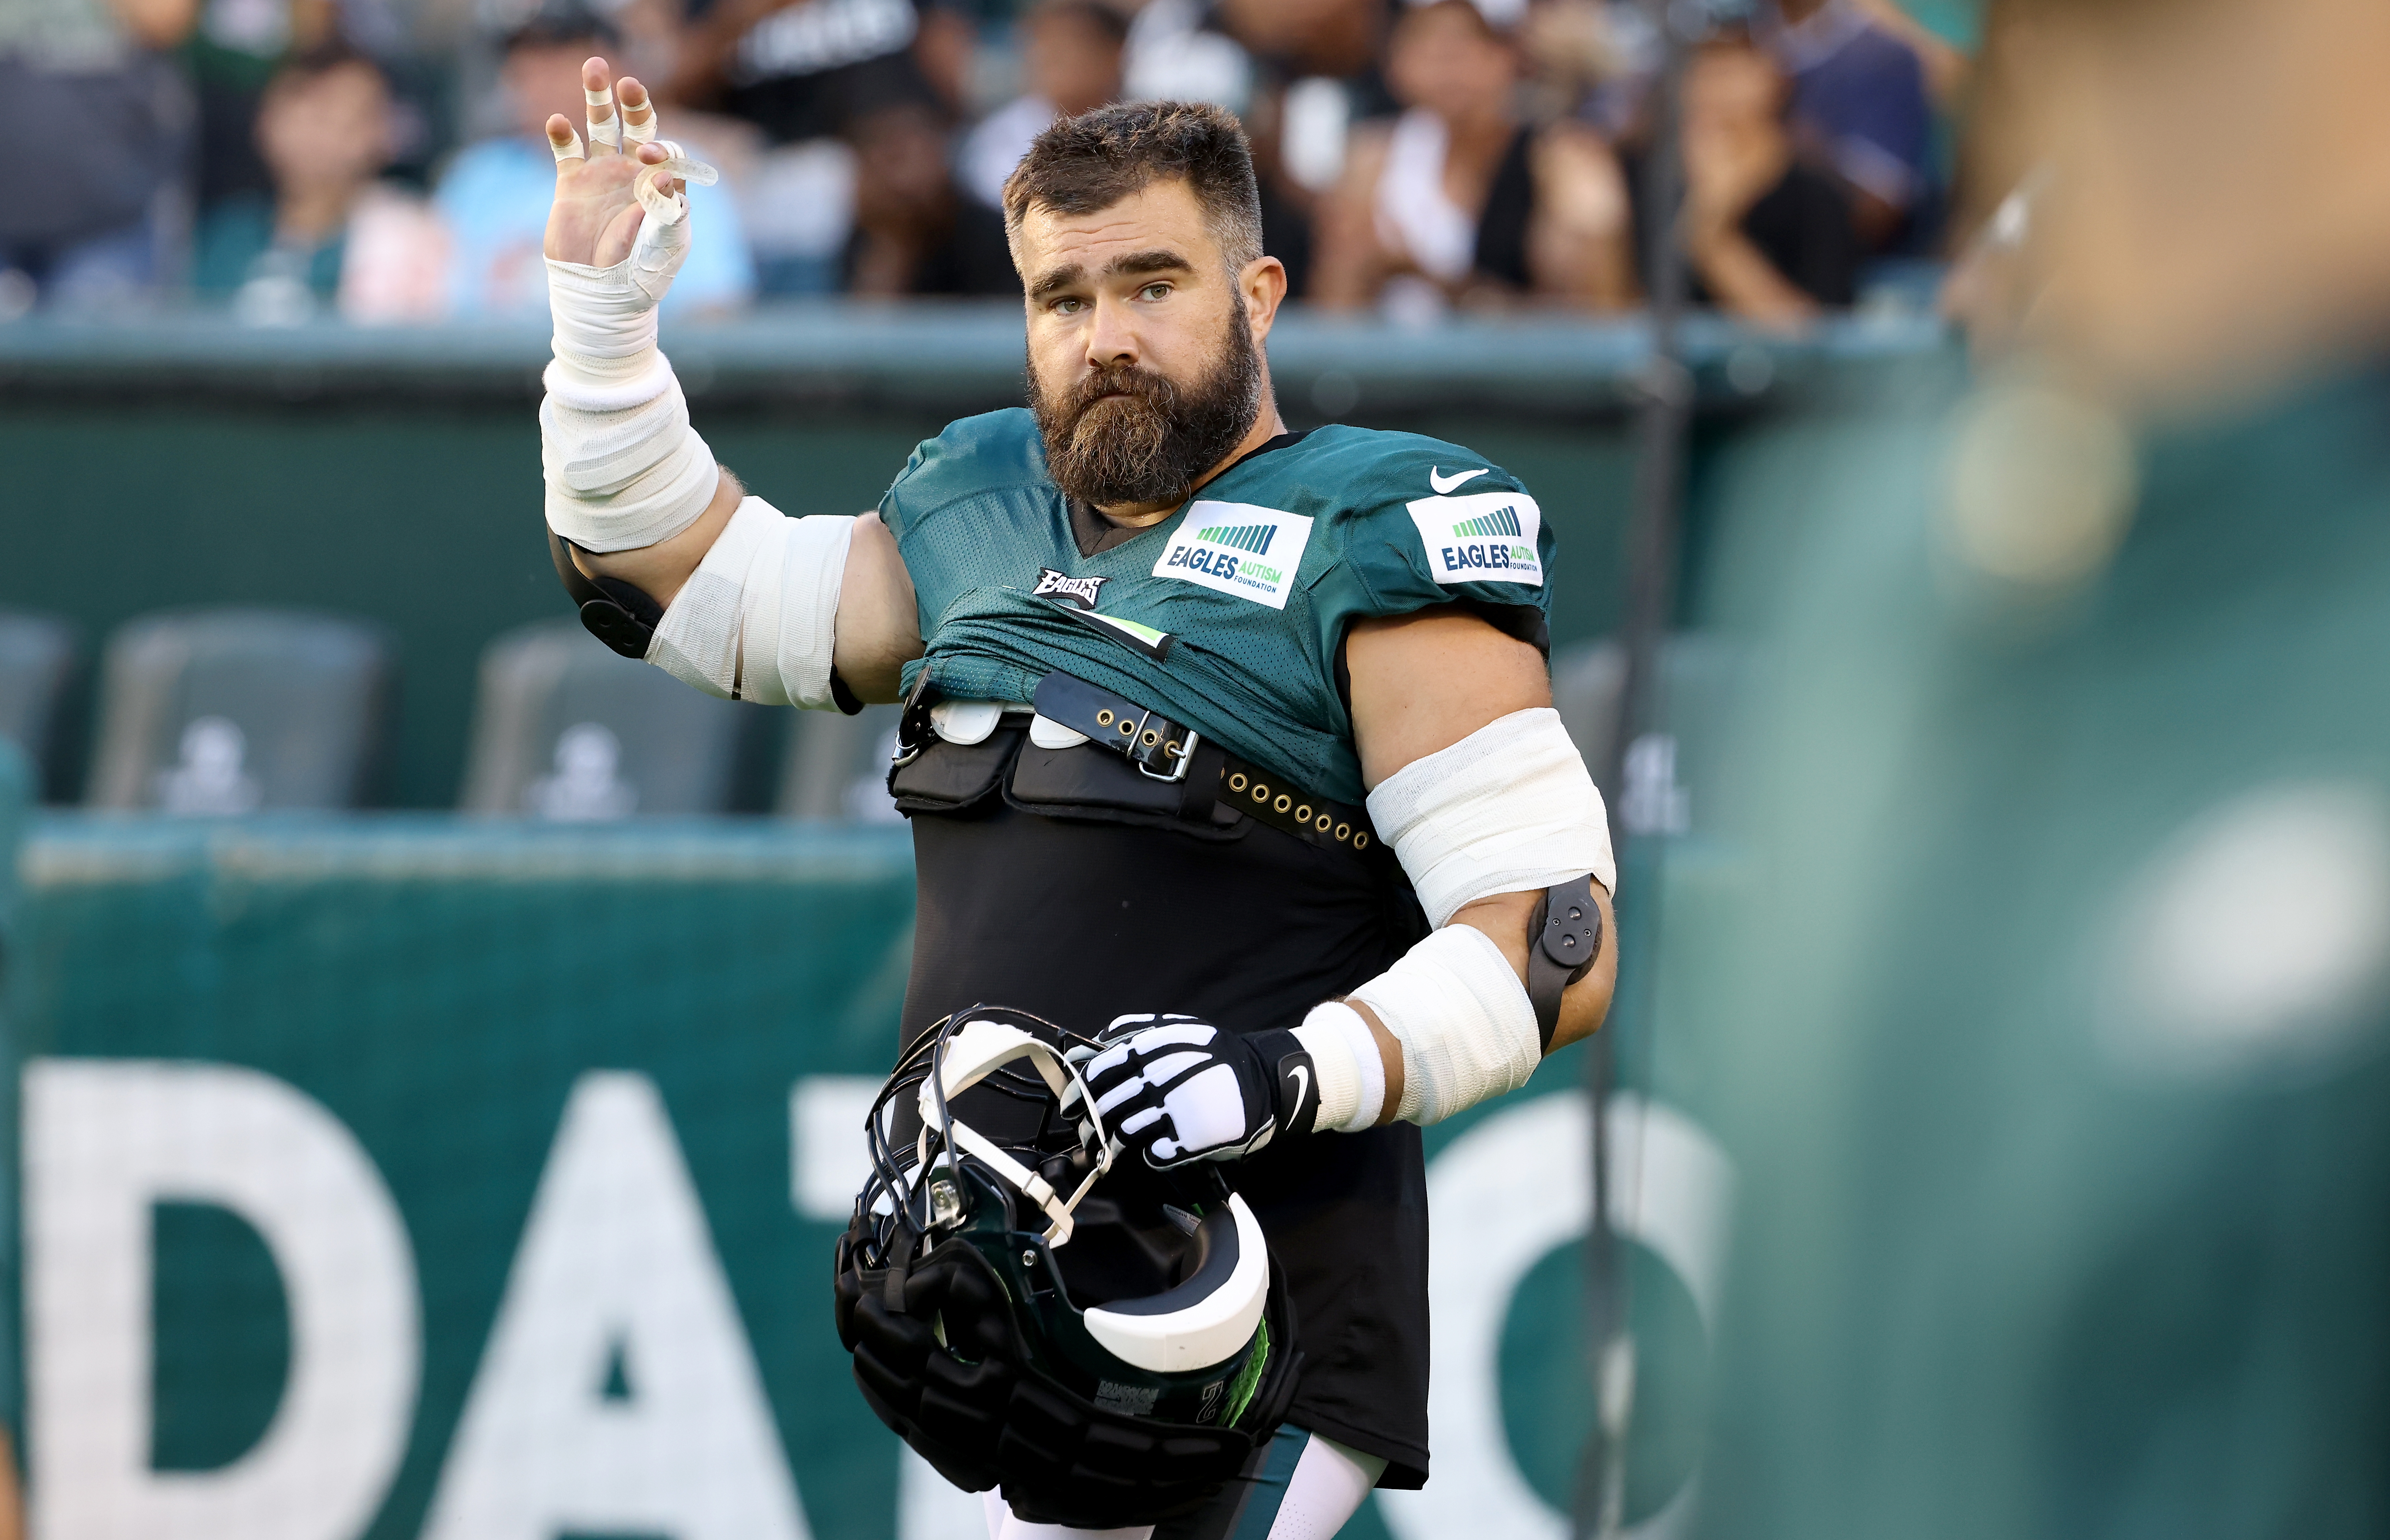 Eagles training camp: How serious is Jason Kelce's elbow injury? 2